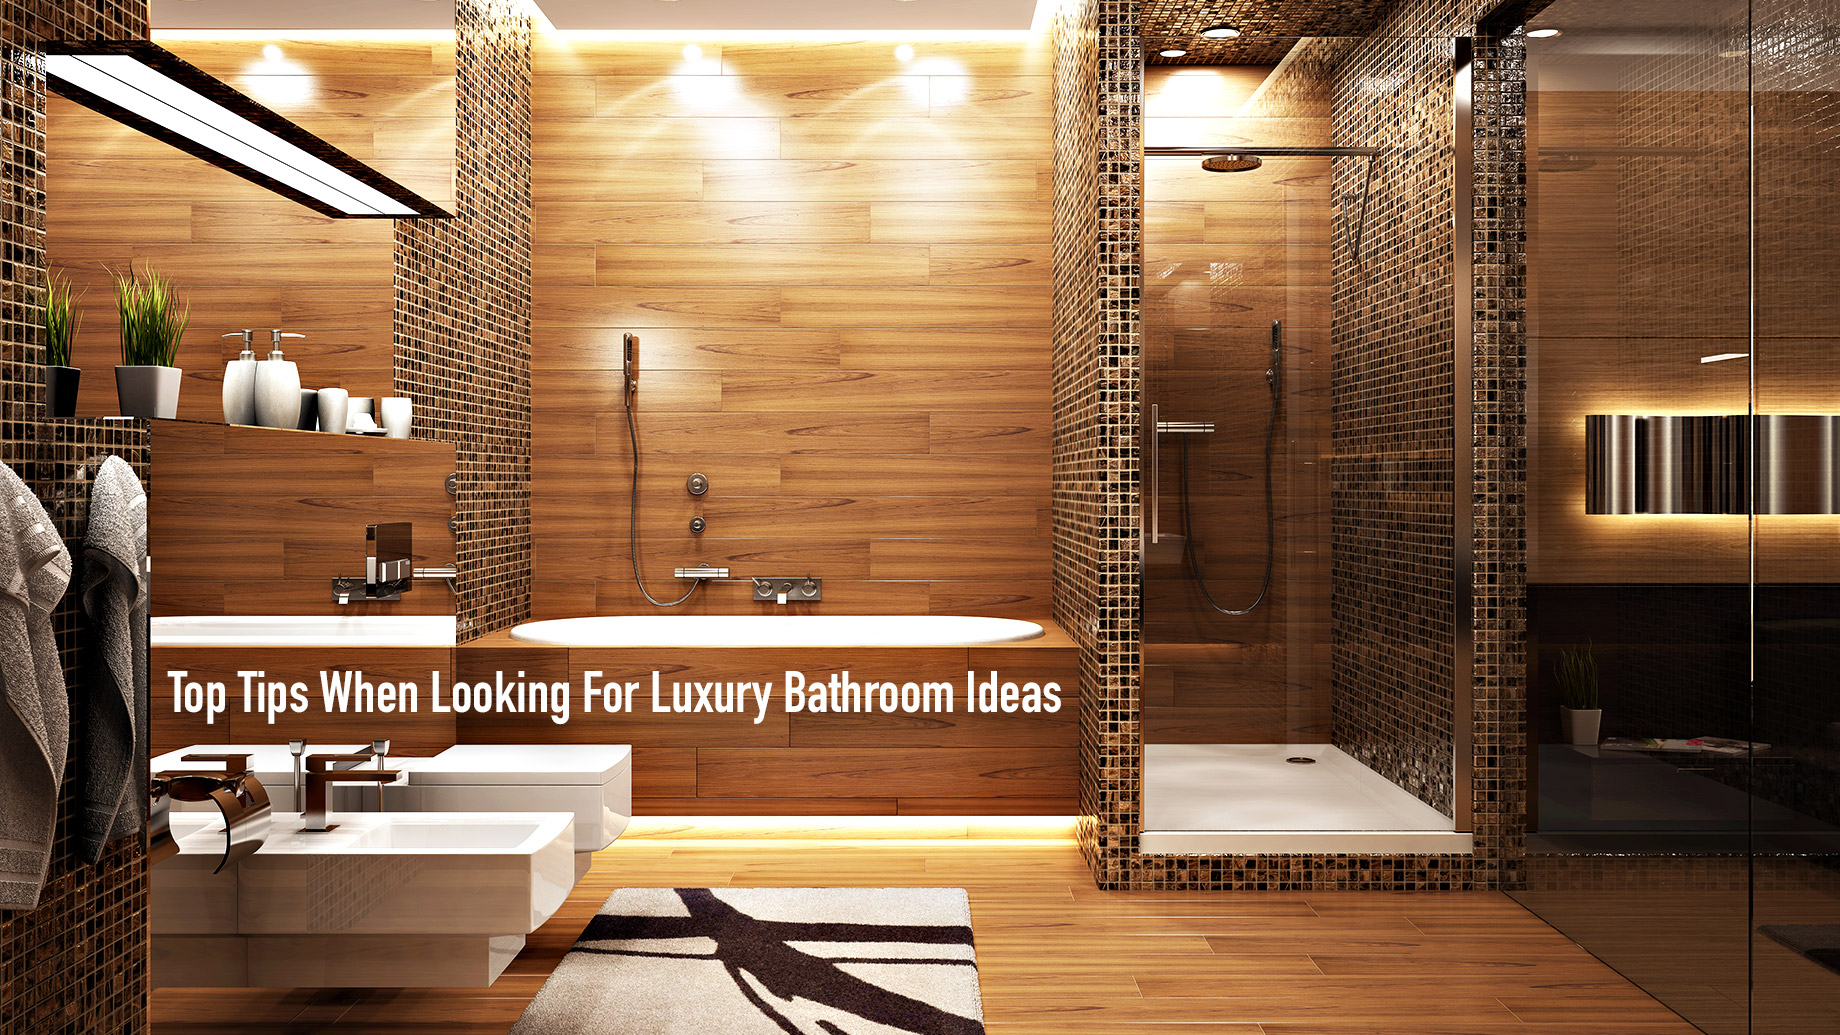 Top Tips When Looking For Luxury Bathroom Ideas